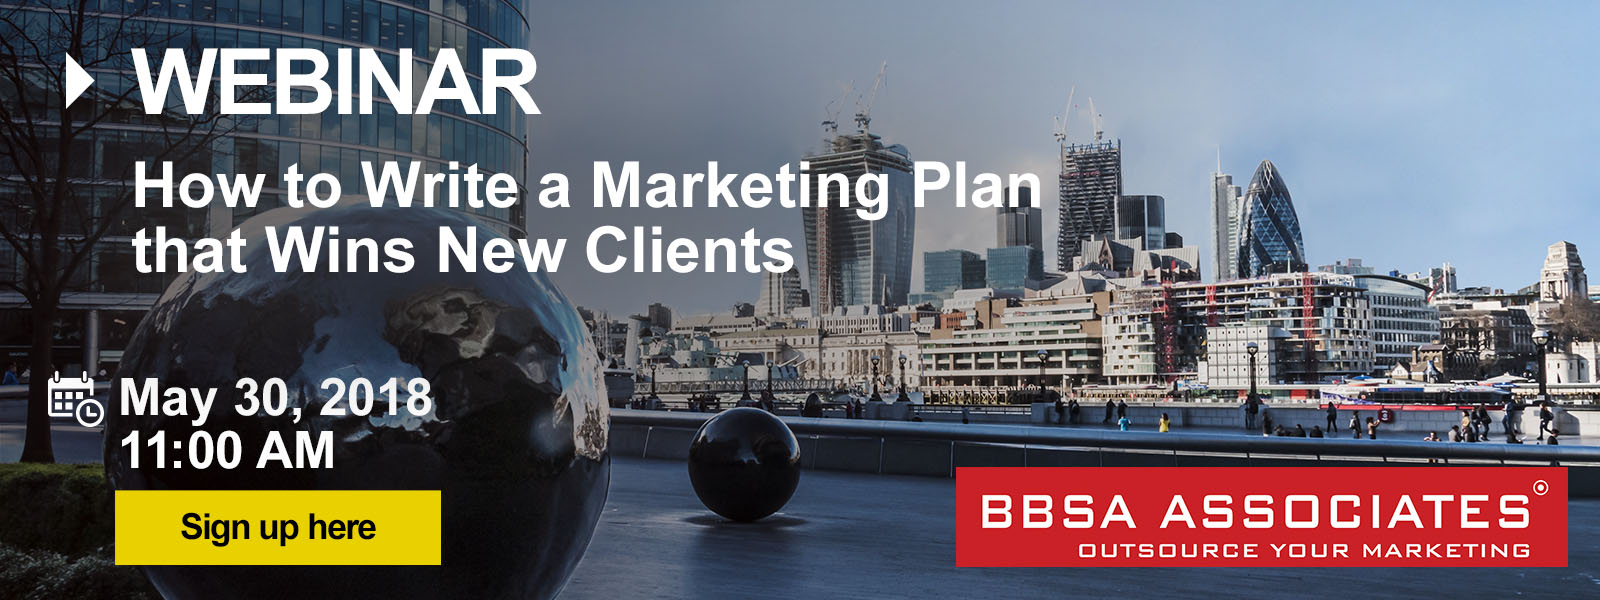 Webinar: How to Write a Marketing Plan That Wins New Clients